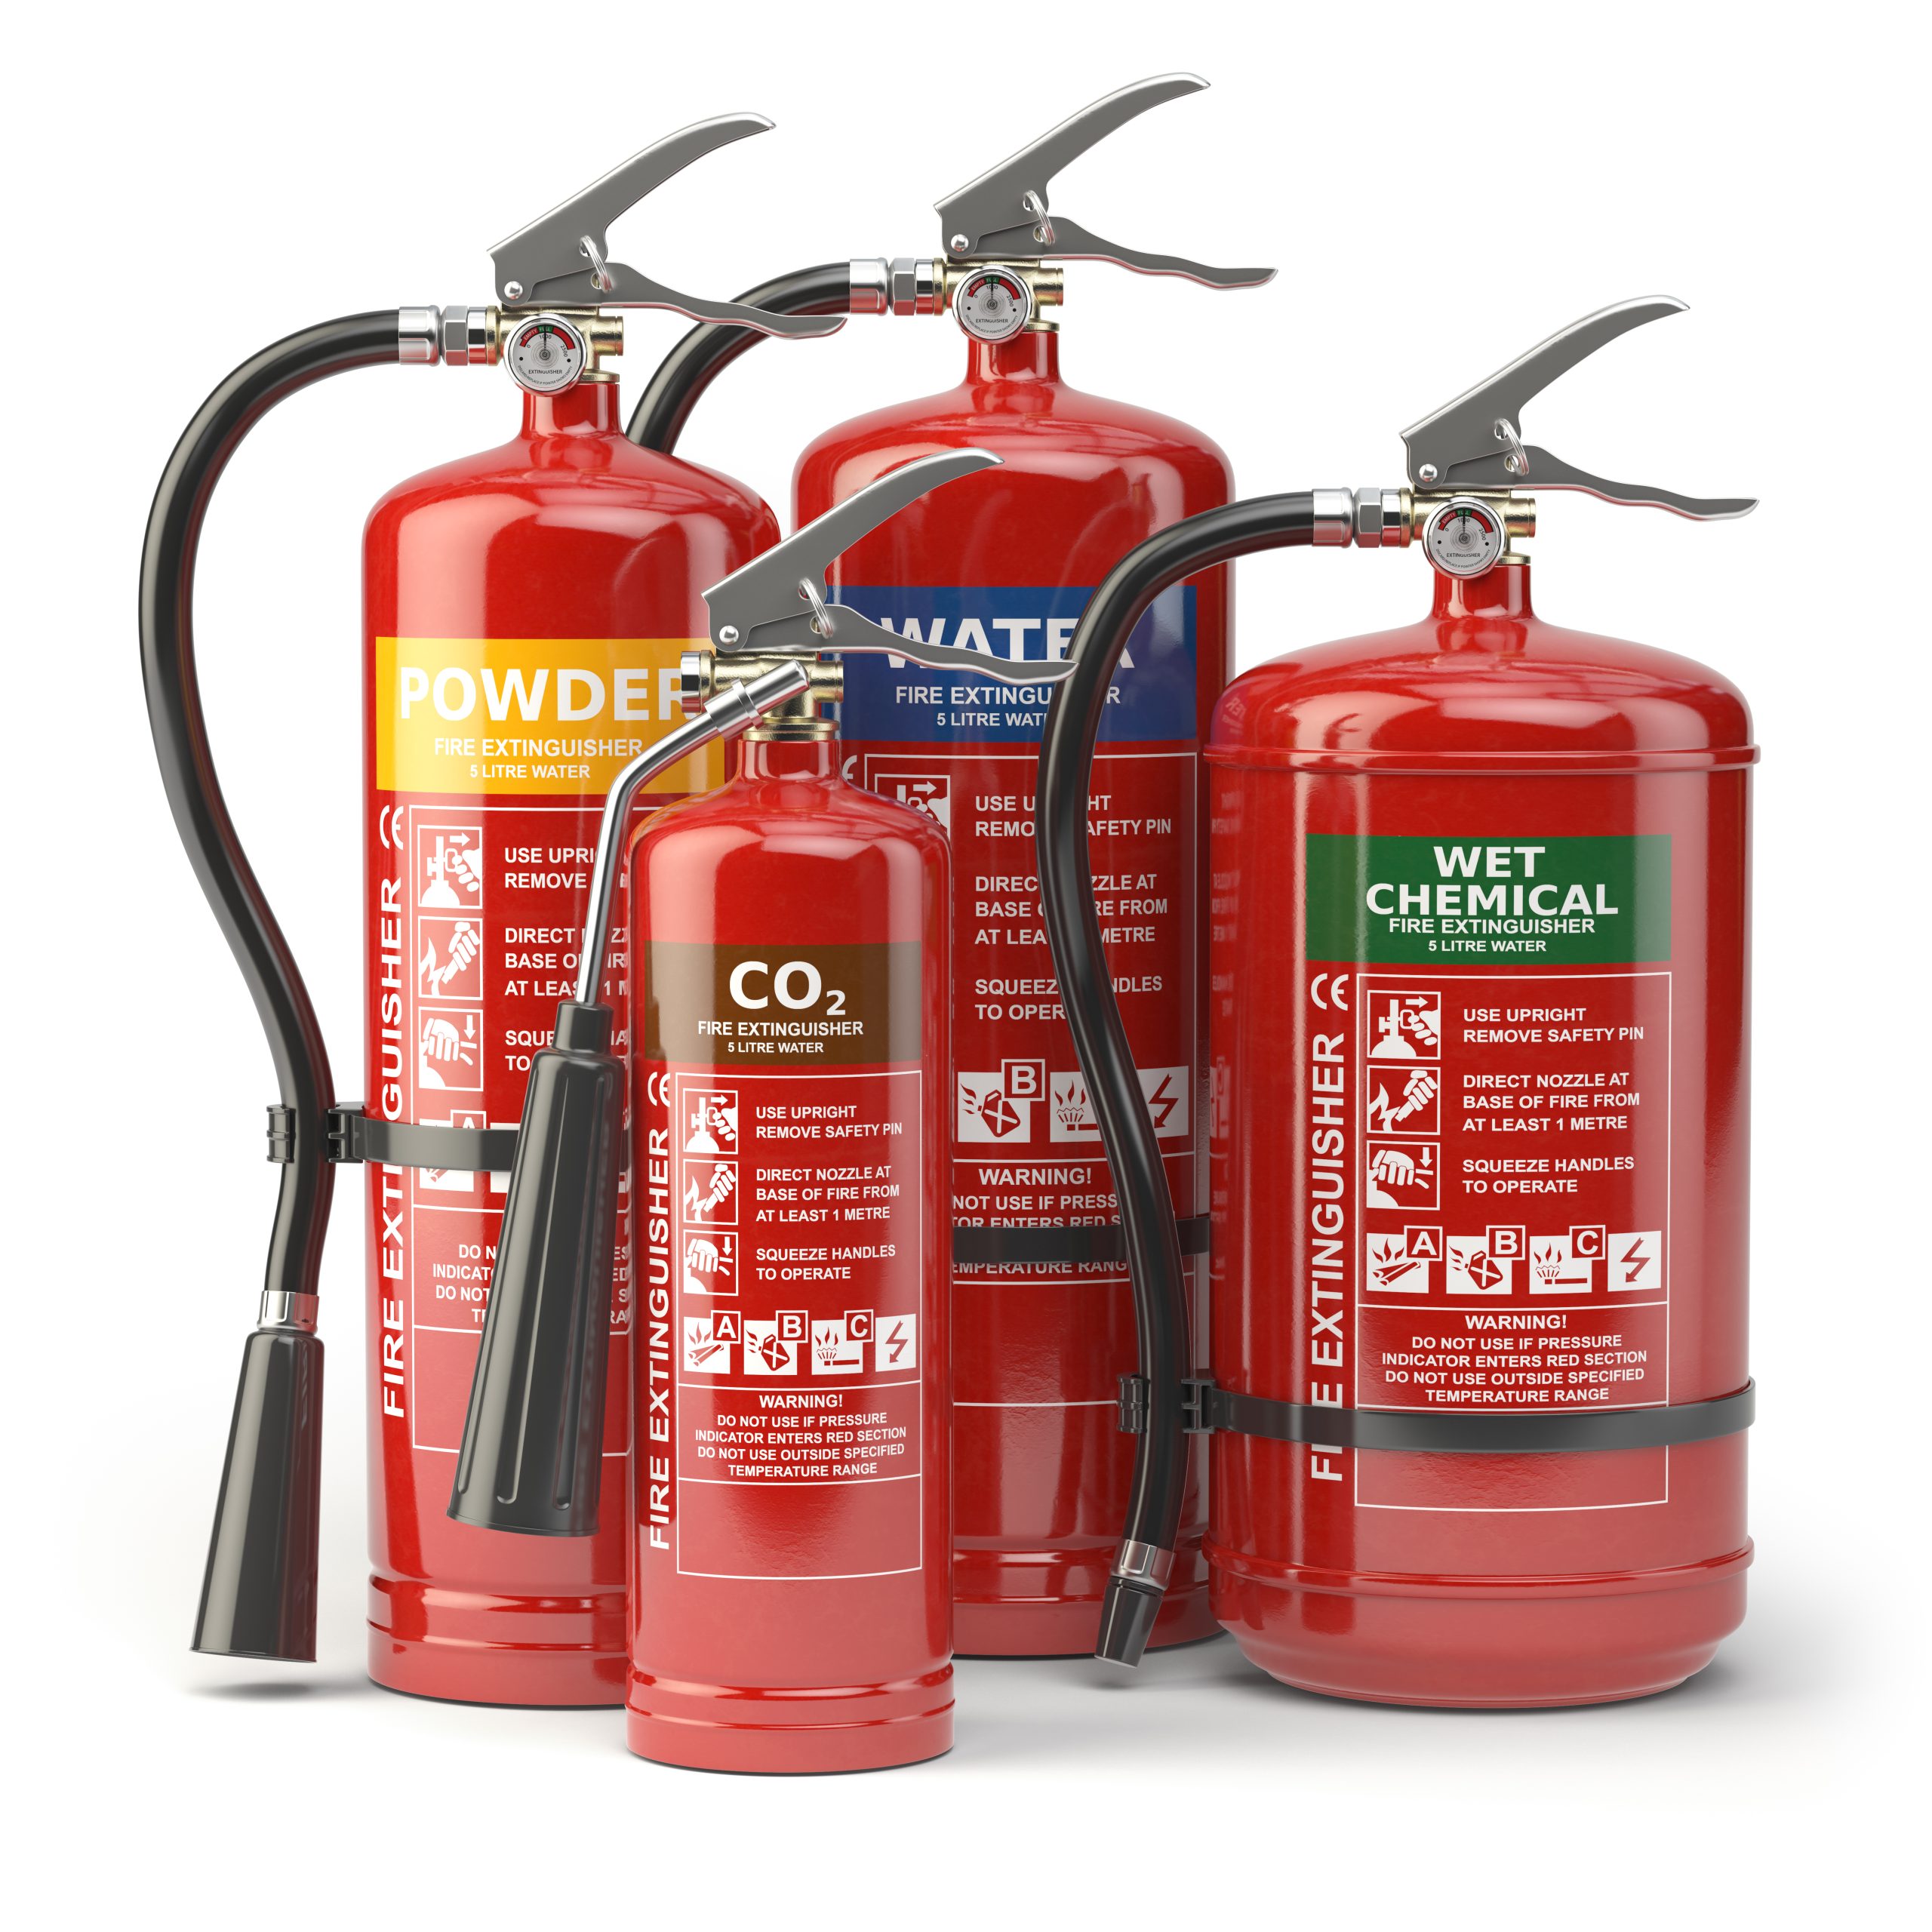 Fire extinguishers are not only pressurised containers they are also classed as hazardous waste and if they are disposed of incorrectly the results can be disastrous.